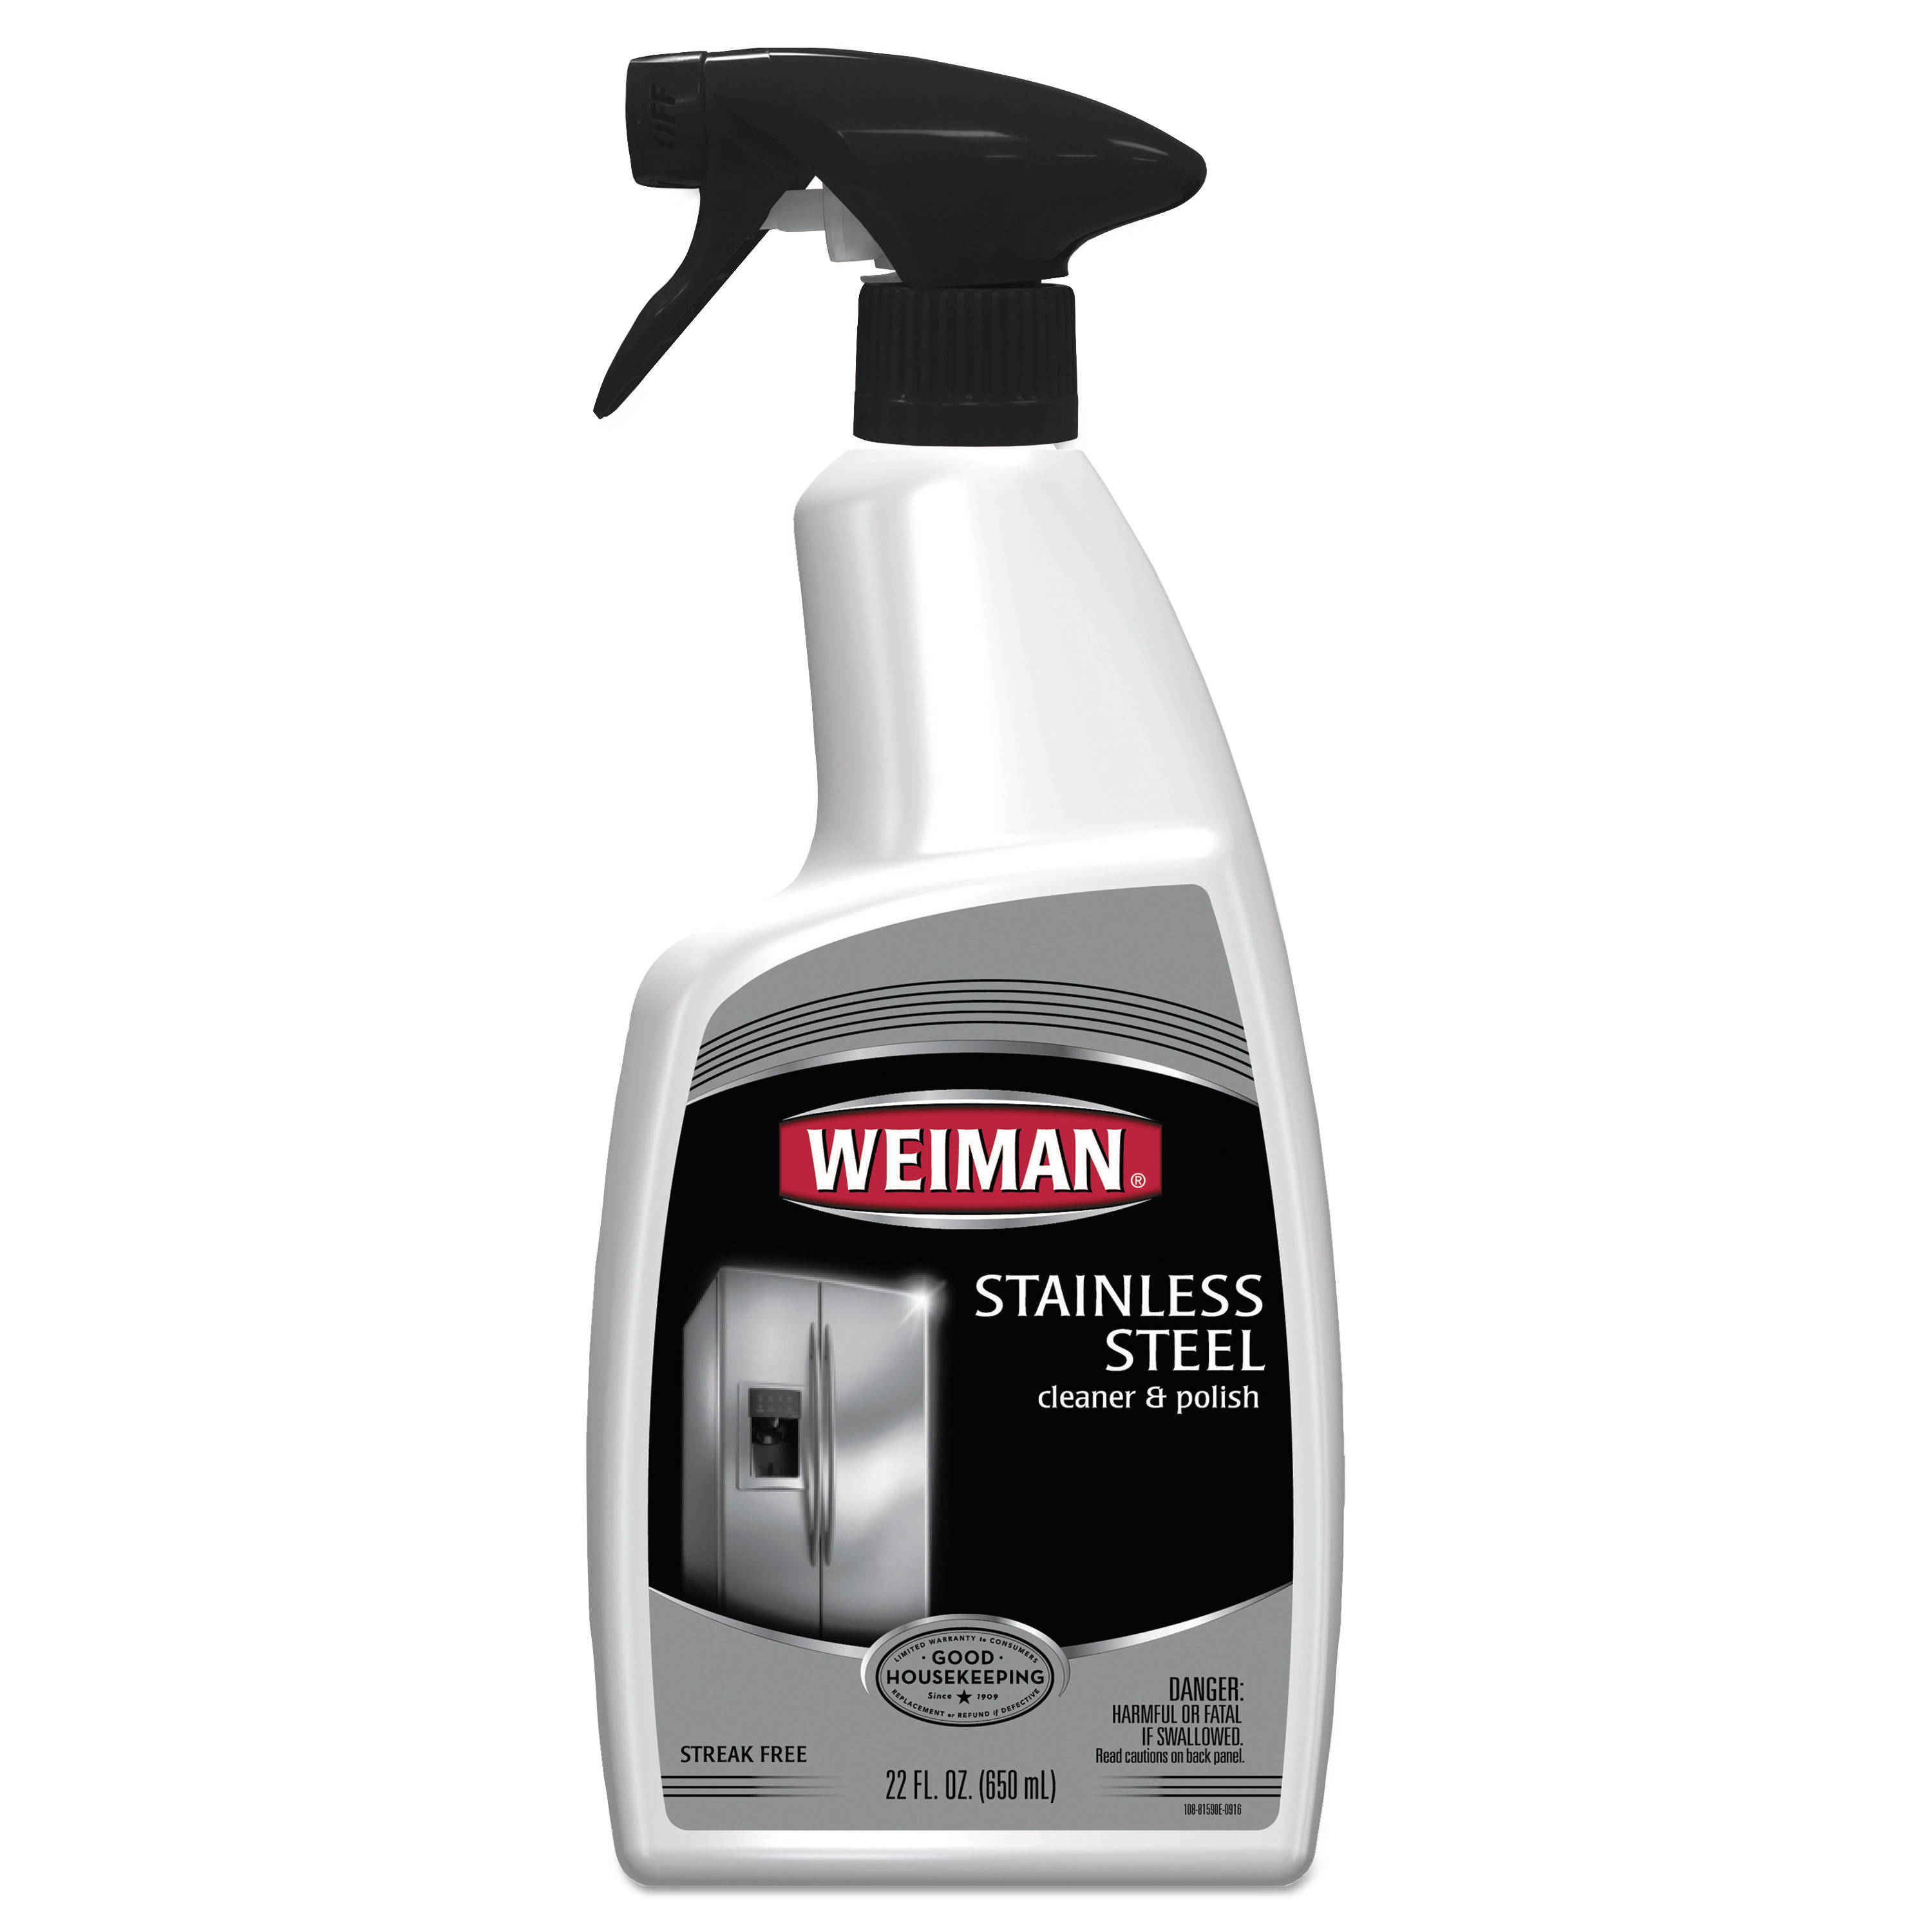  WEIMAN 108EA Stainless Steel Cleaner and Polish, Floral Scent, 22 oz Trigger Spray Bottle (WMN108EA) 